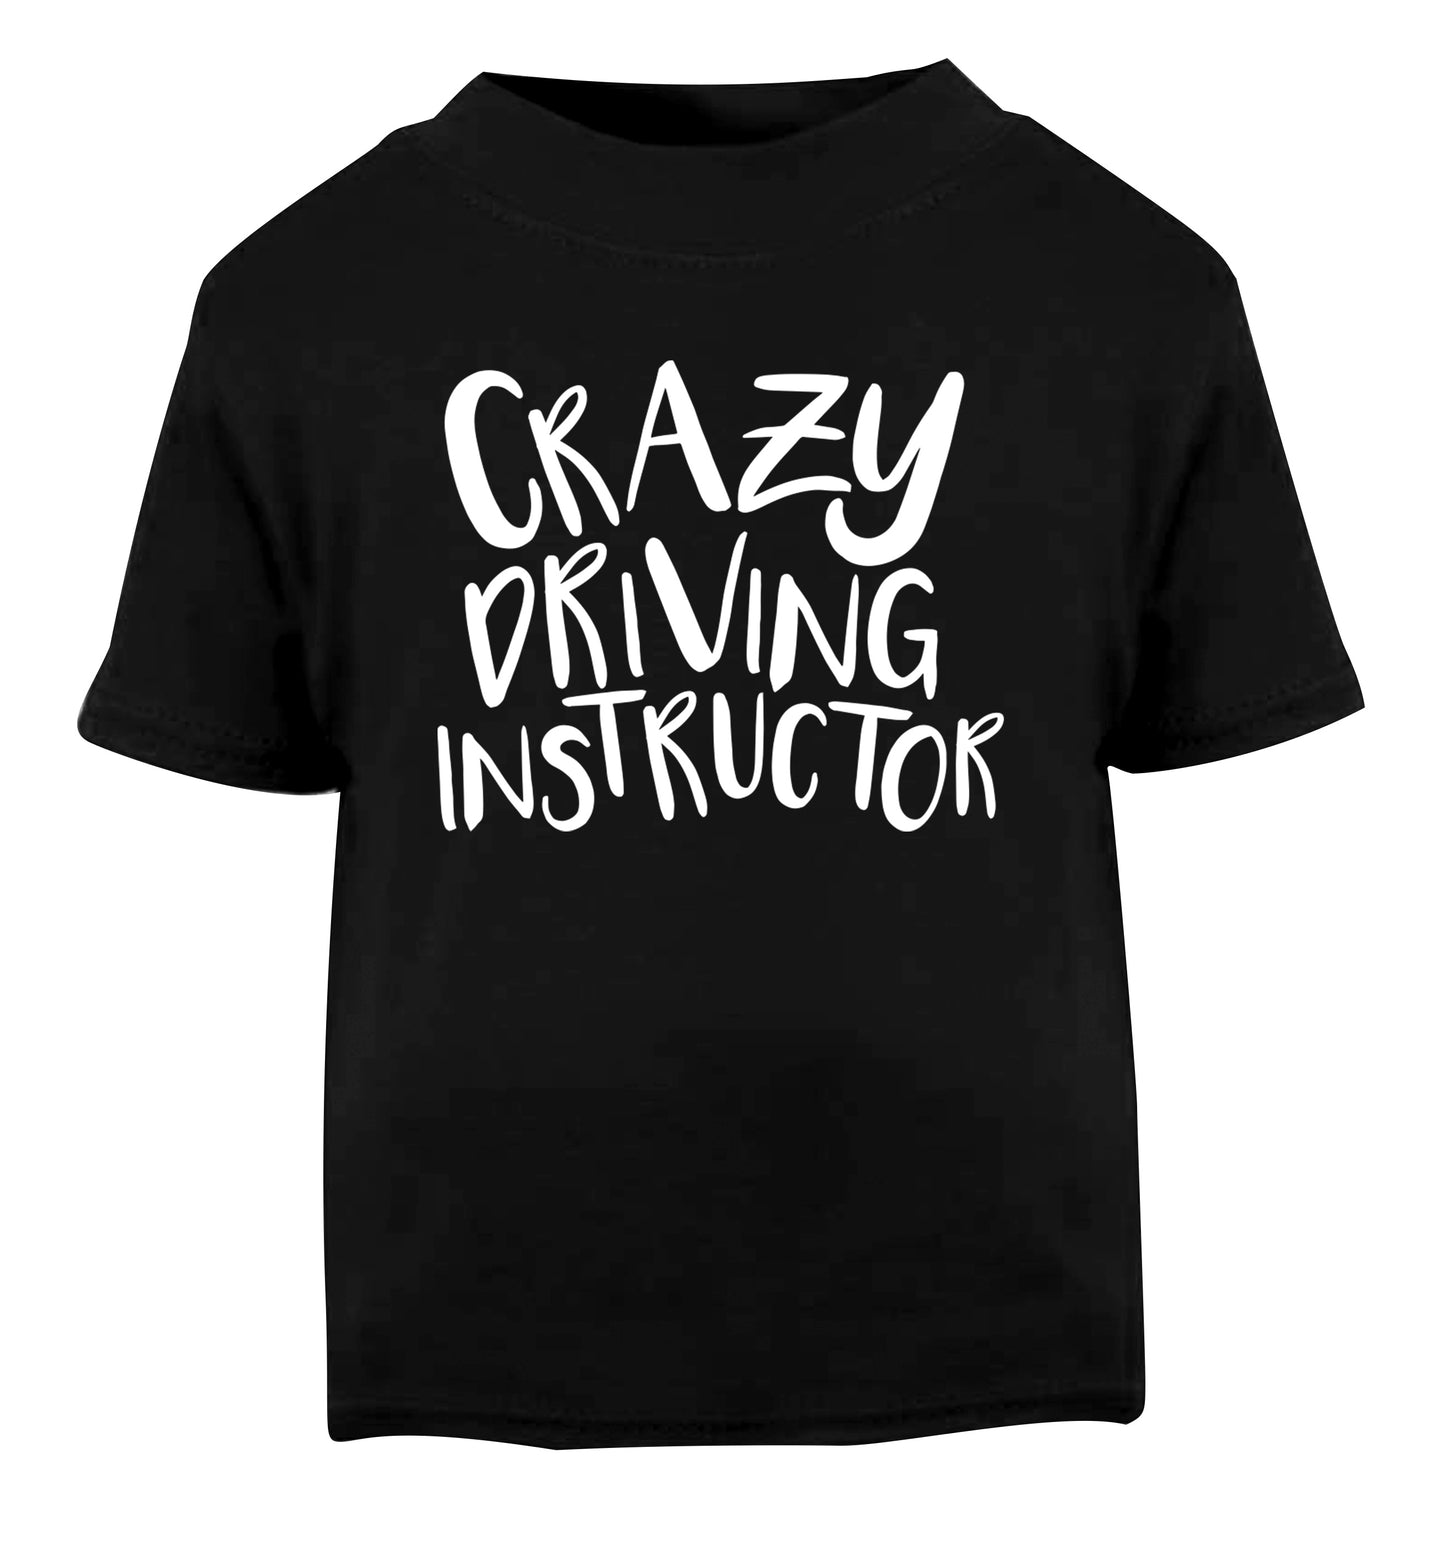 Crazy driving instructor Black Baby Toddler Tshirt 2 years